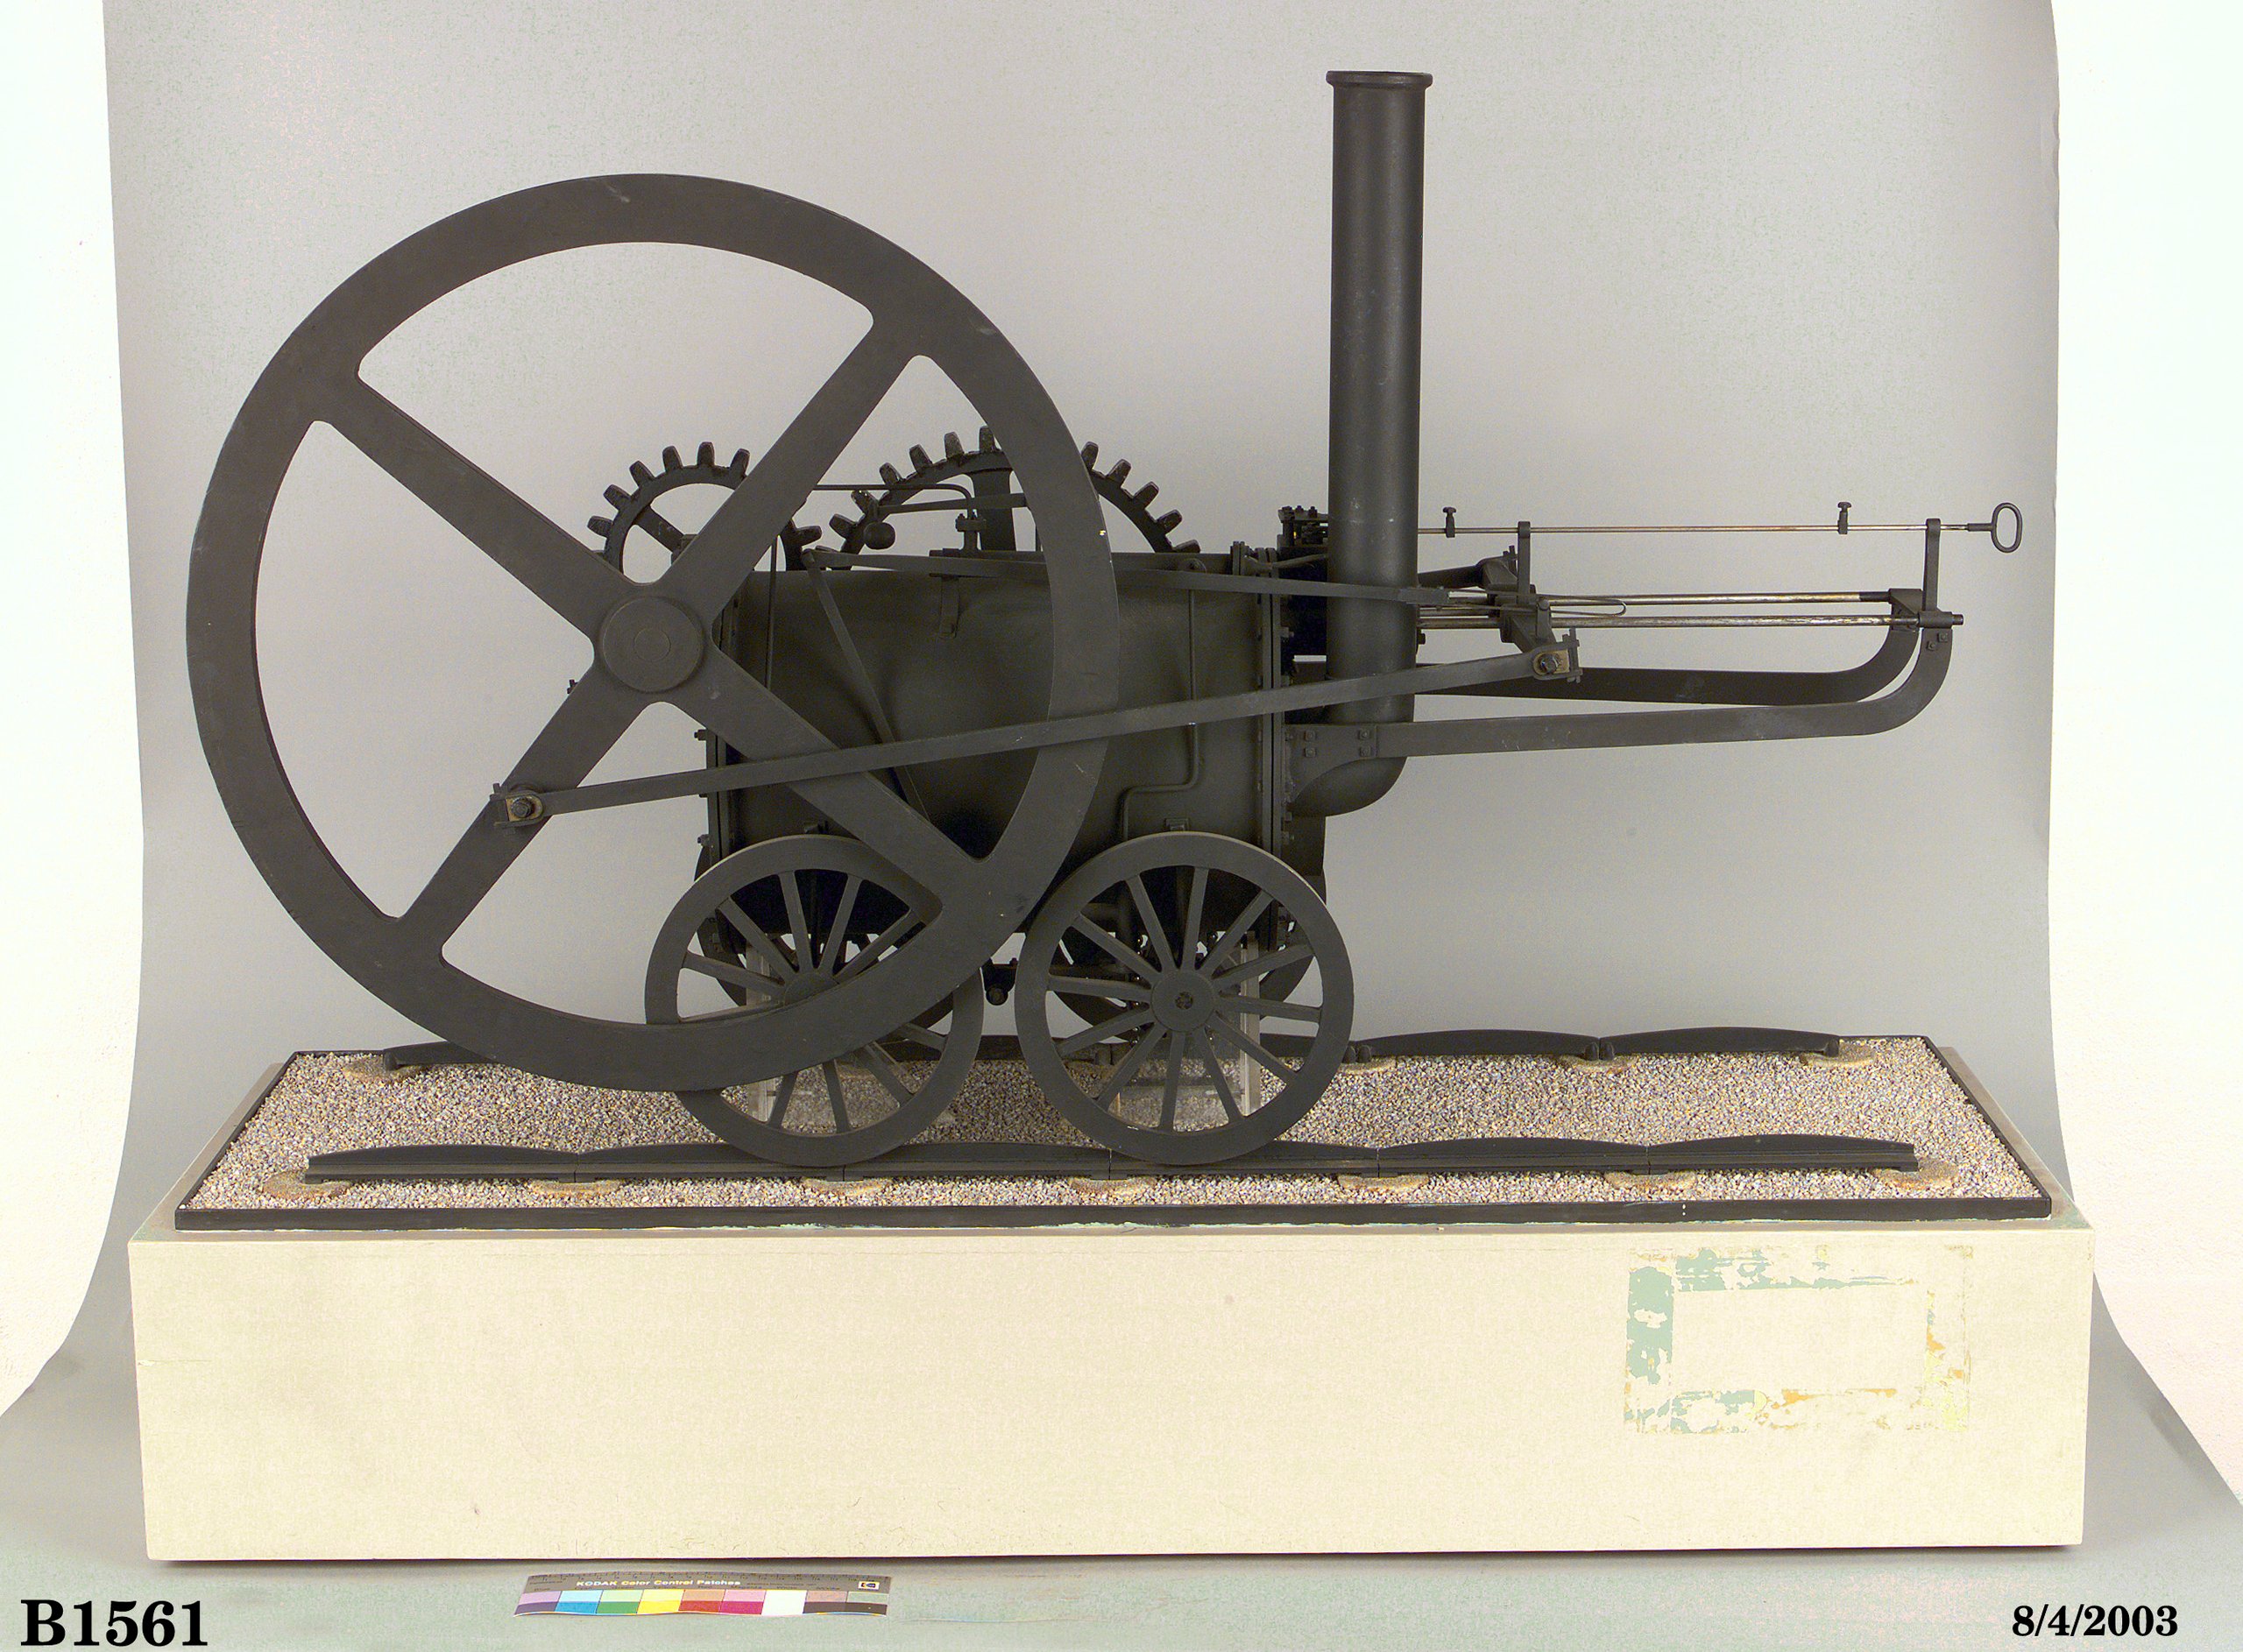 Model of Trevithick's 1804 tramway steam locomotive